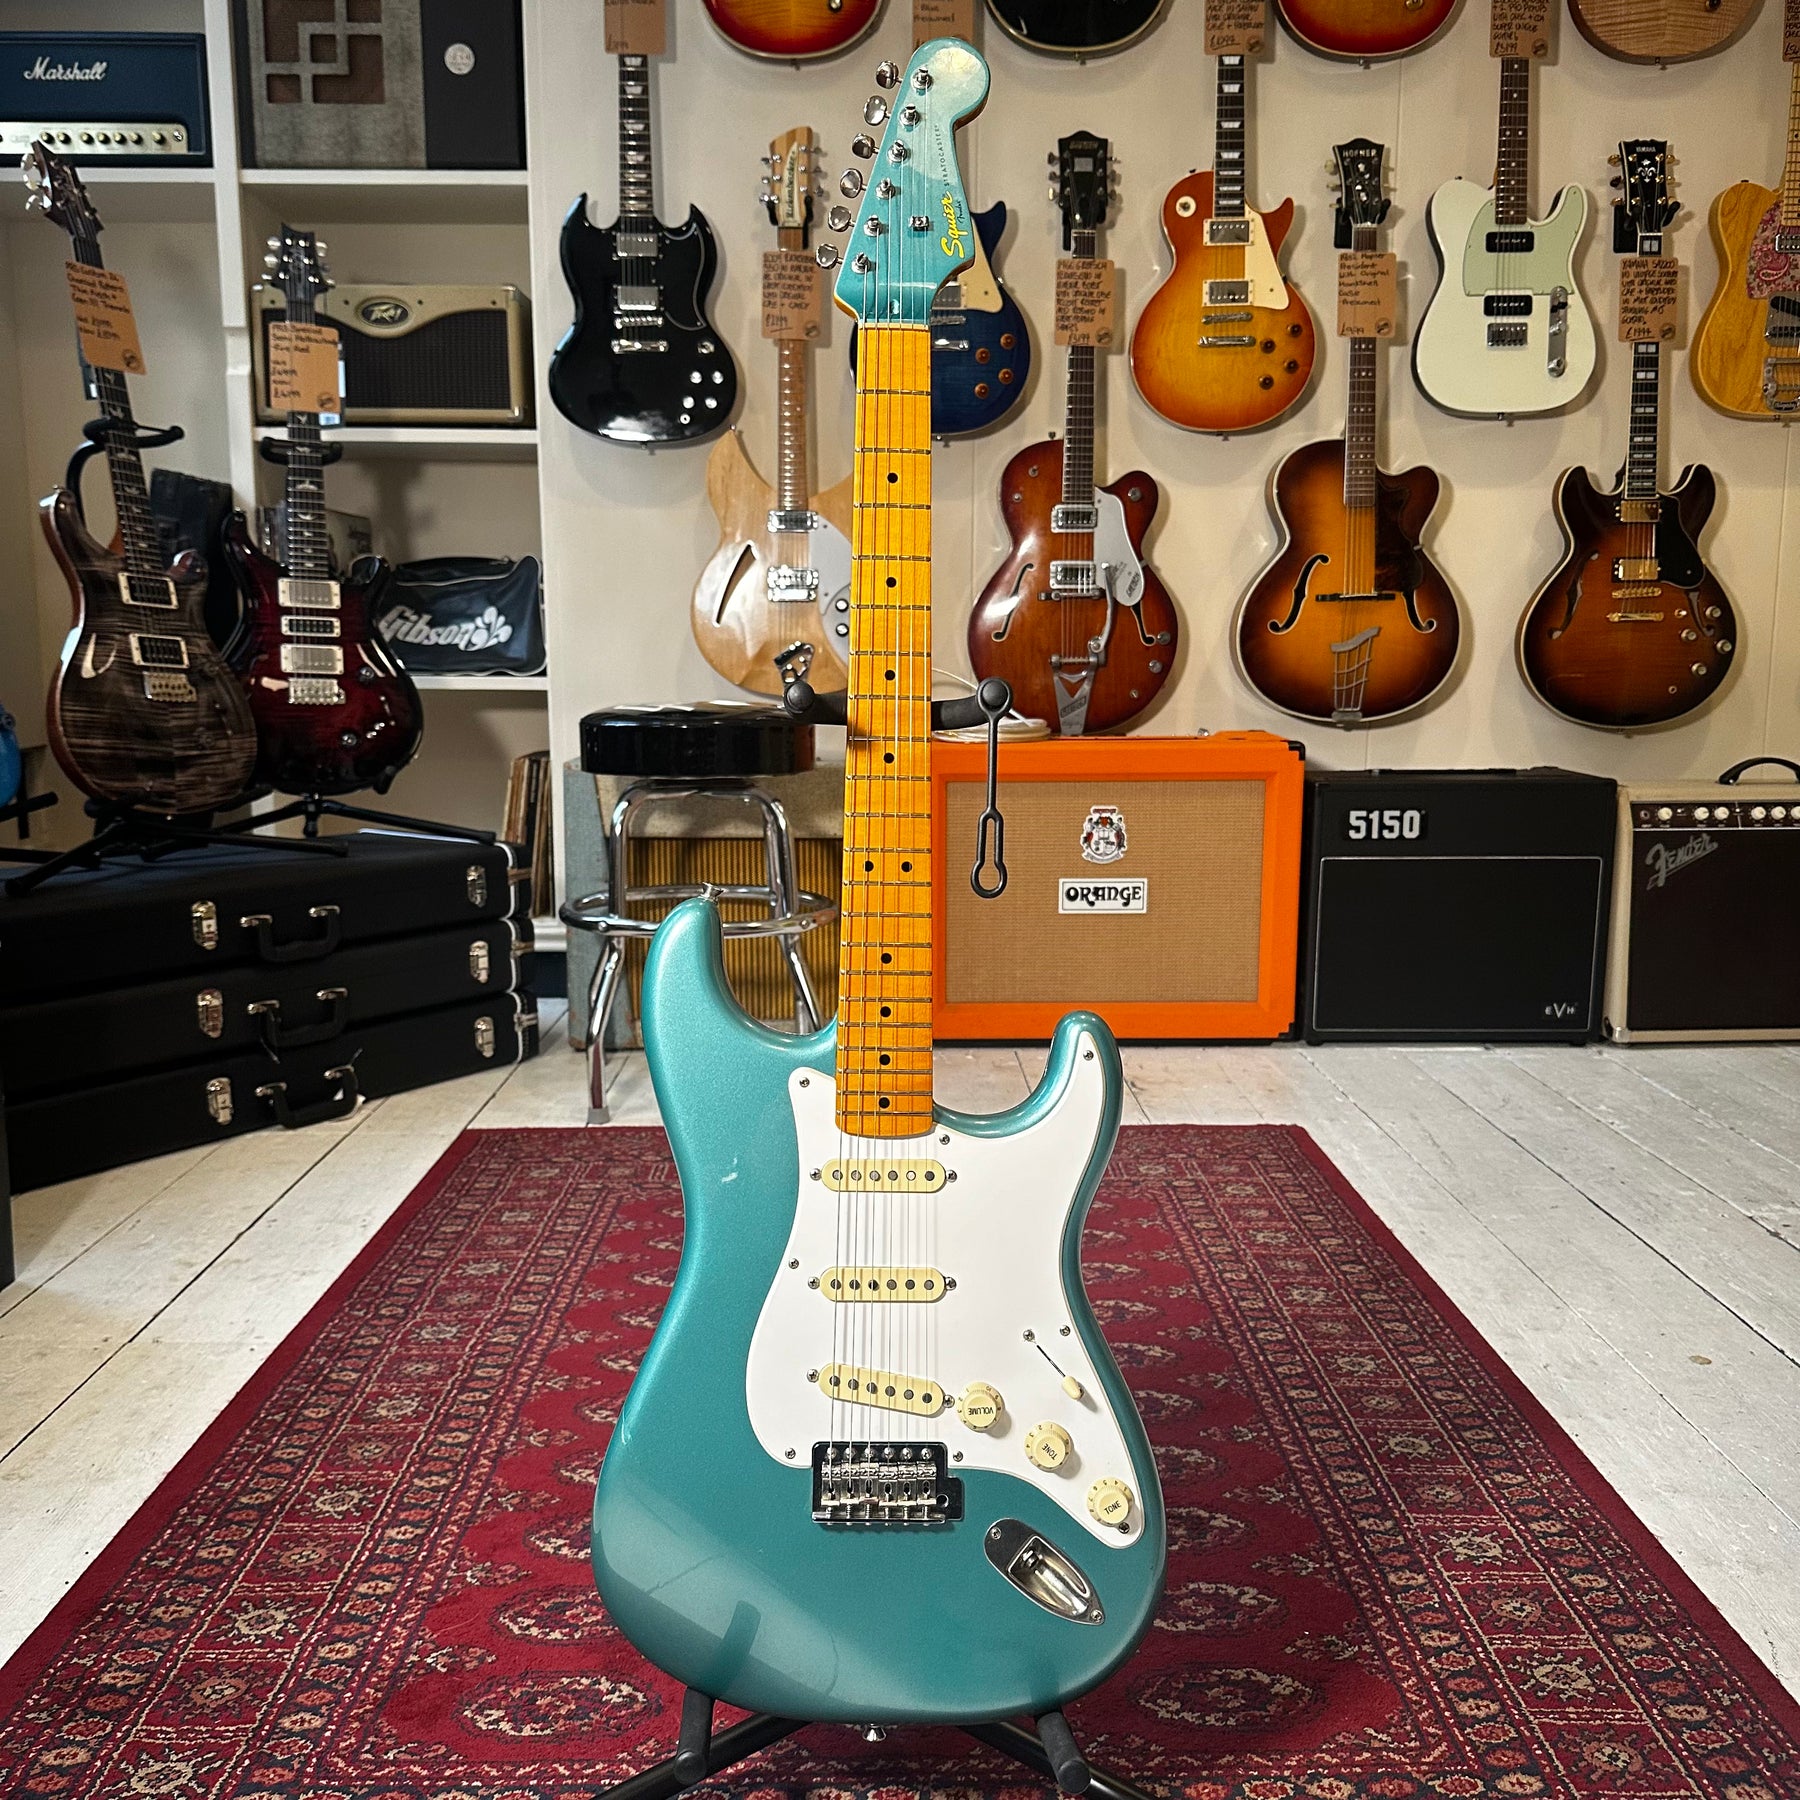 Squier Classic Vibe 50s Stratocaster - Faded Metallic Sherwood Green - Preowned